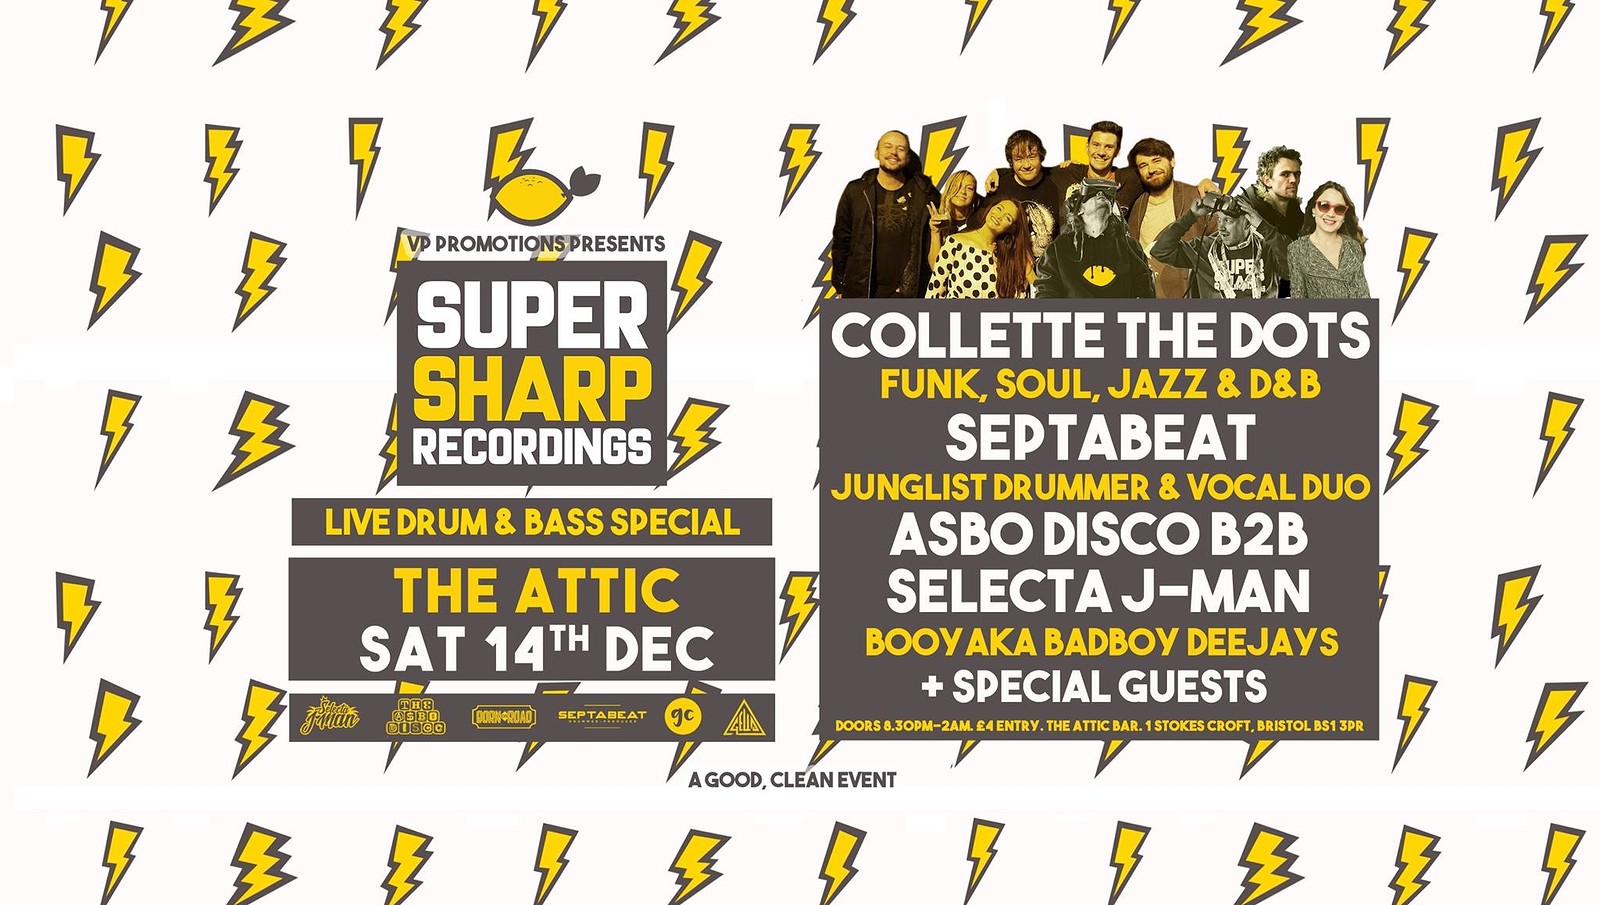 Super Sharp Recordings: Drum & Bass Special at The Attic Bar